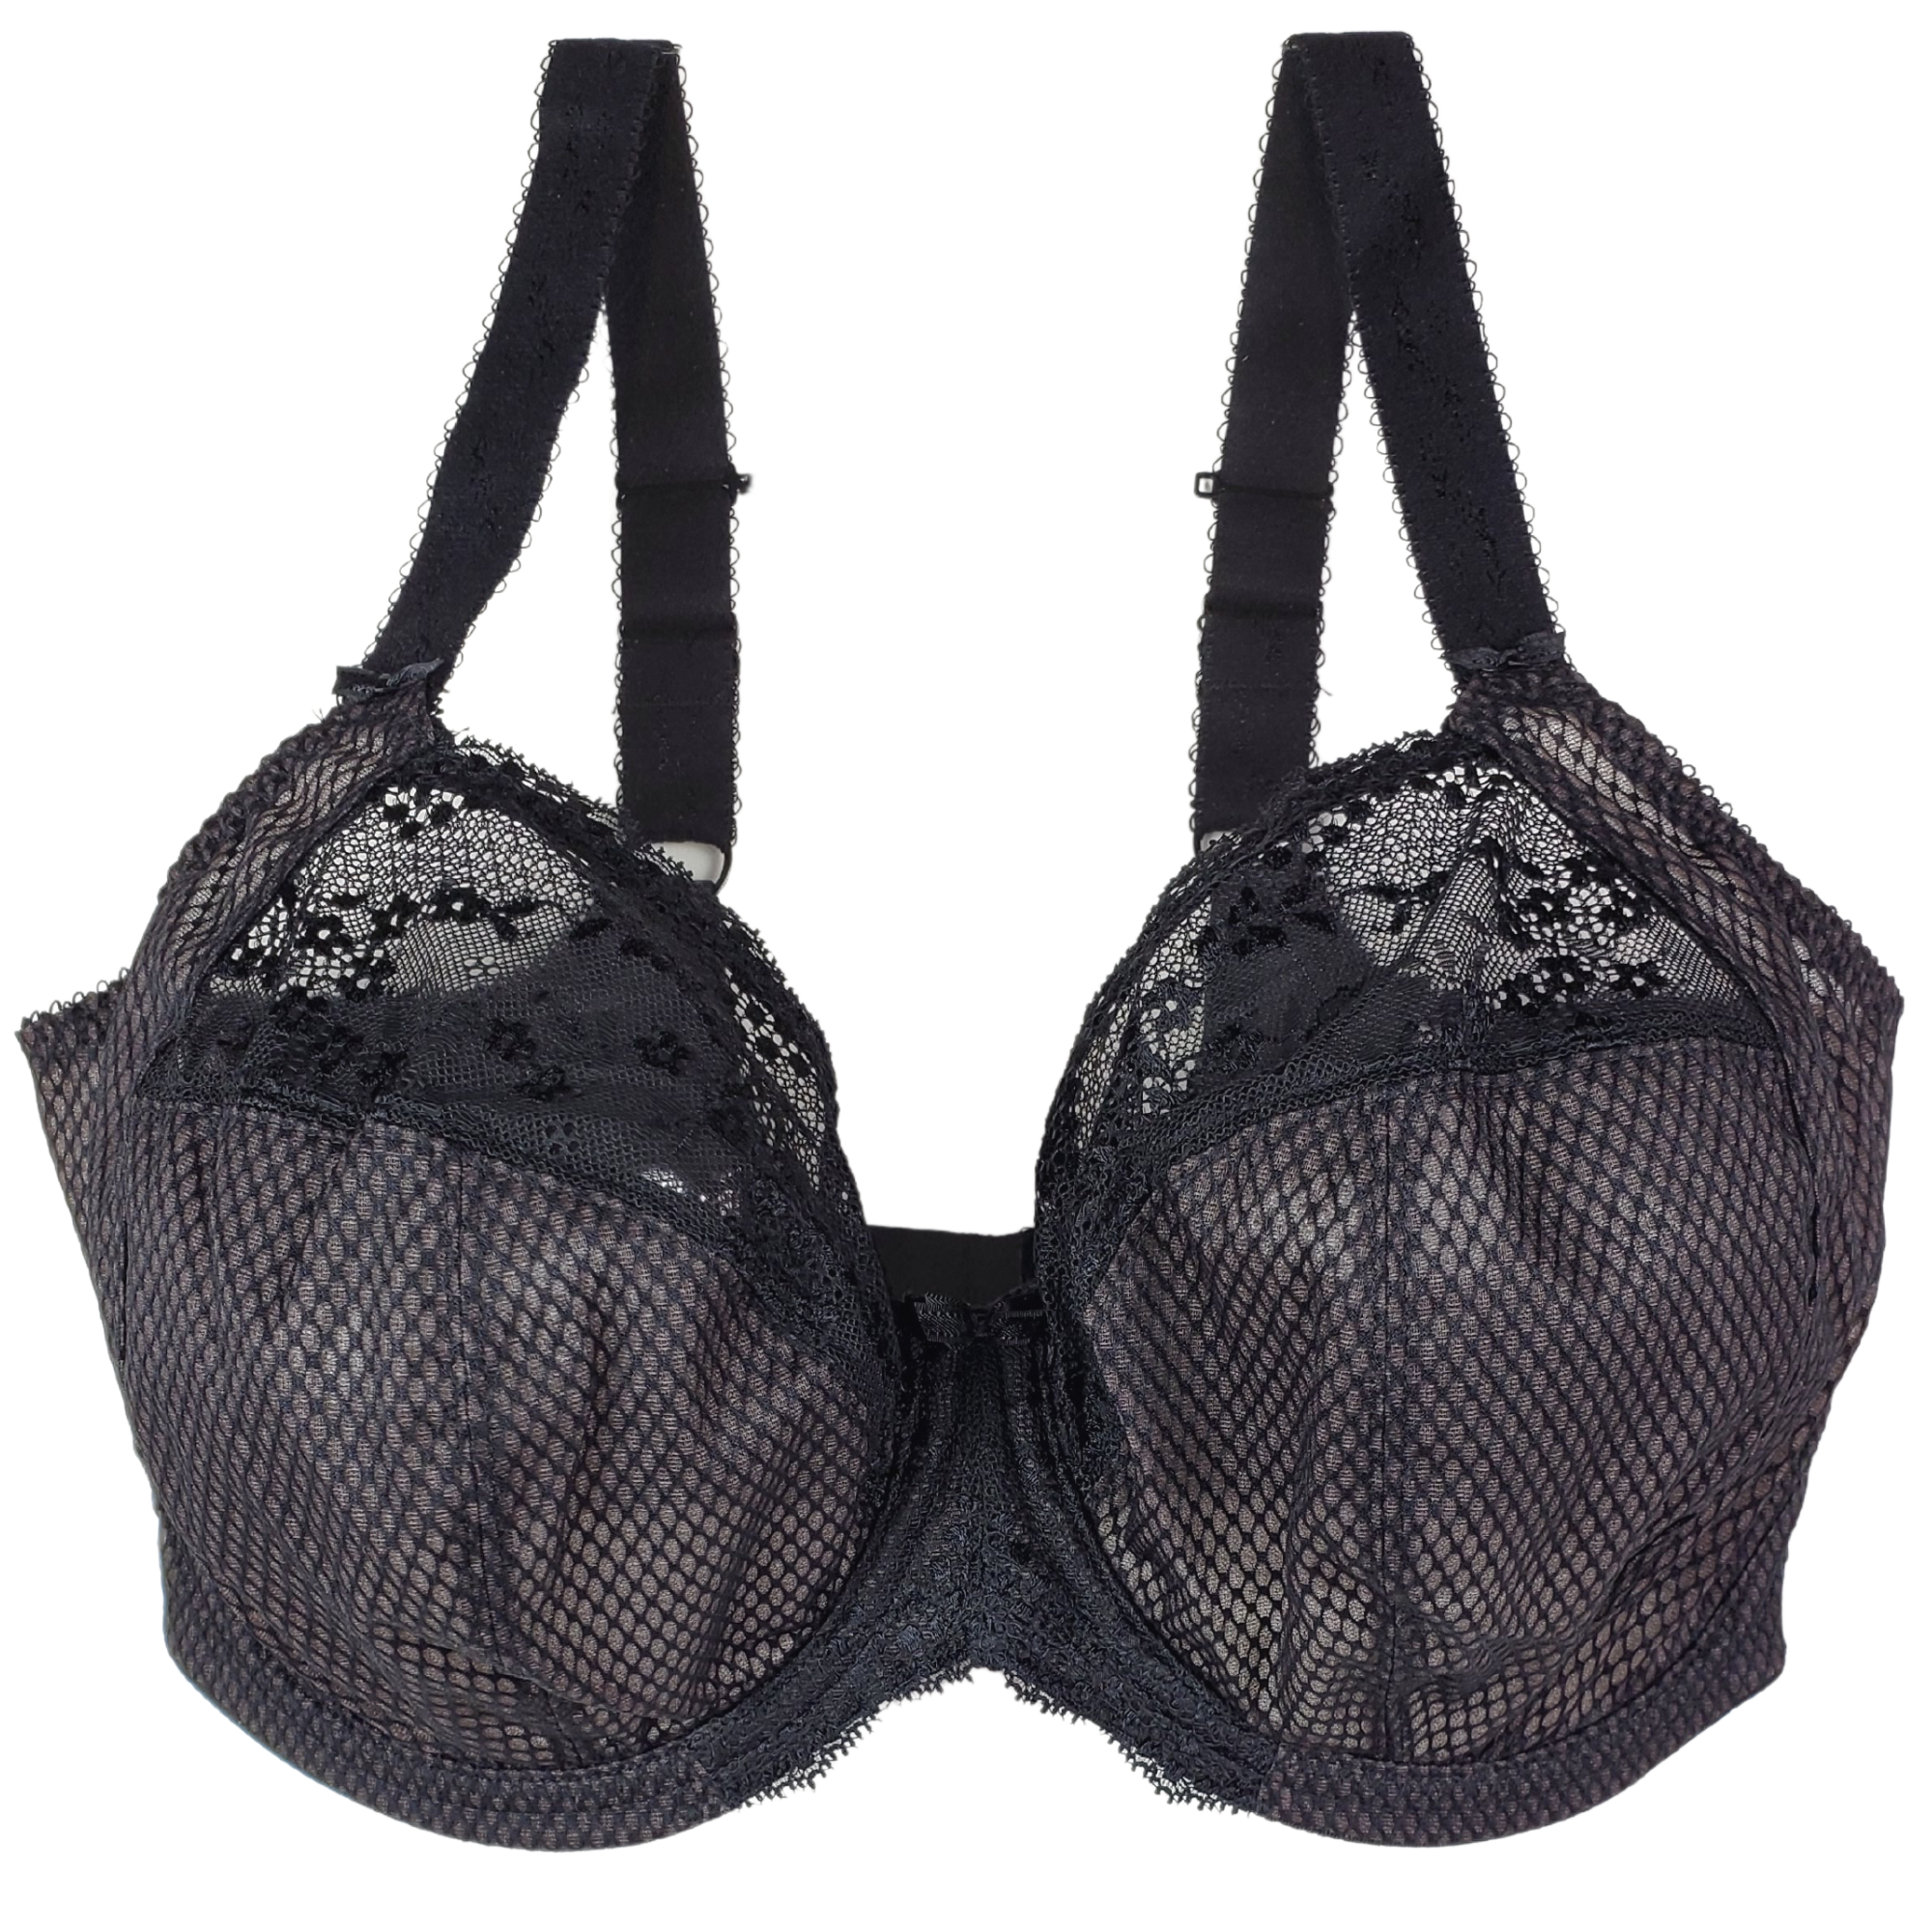 36A Cup Size Bras  Lace Triangle Padded Push Up Luxury Designer Bras  Tagged black - Mimi Holliday